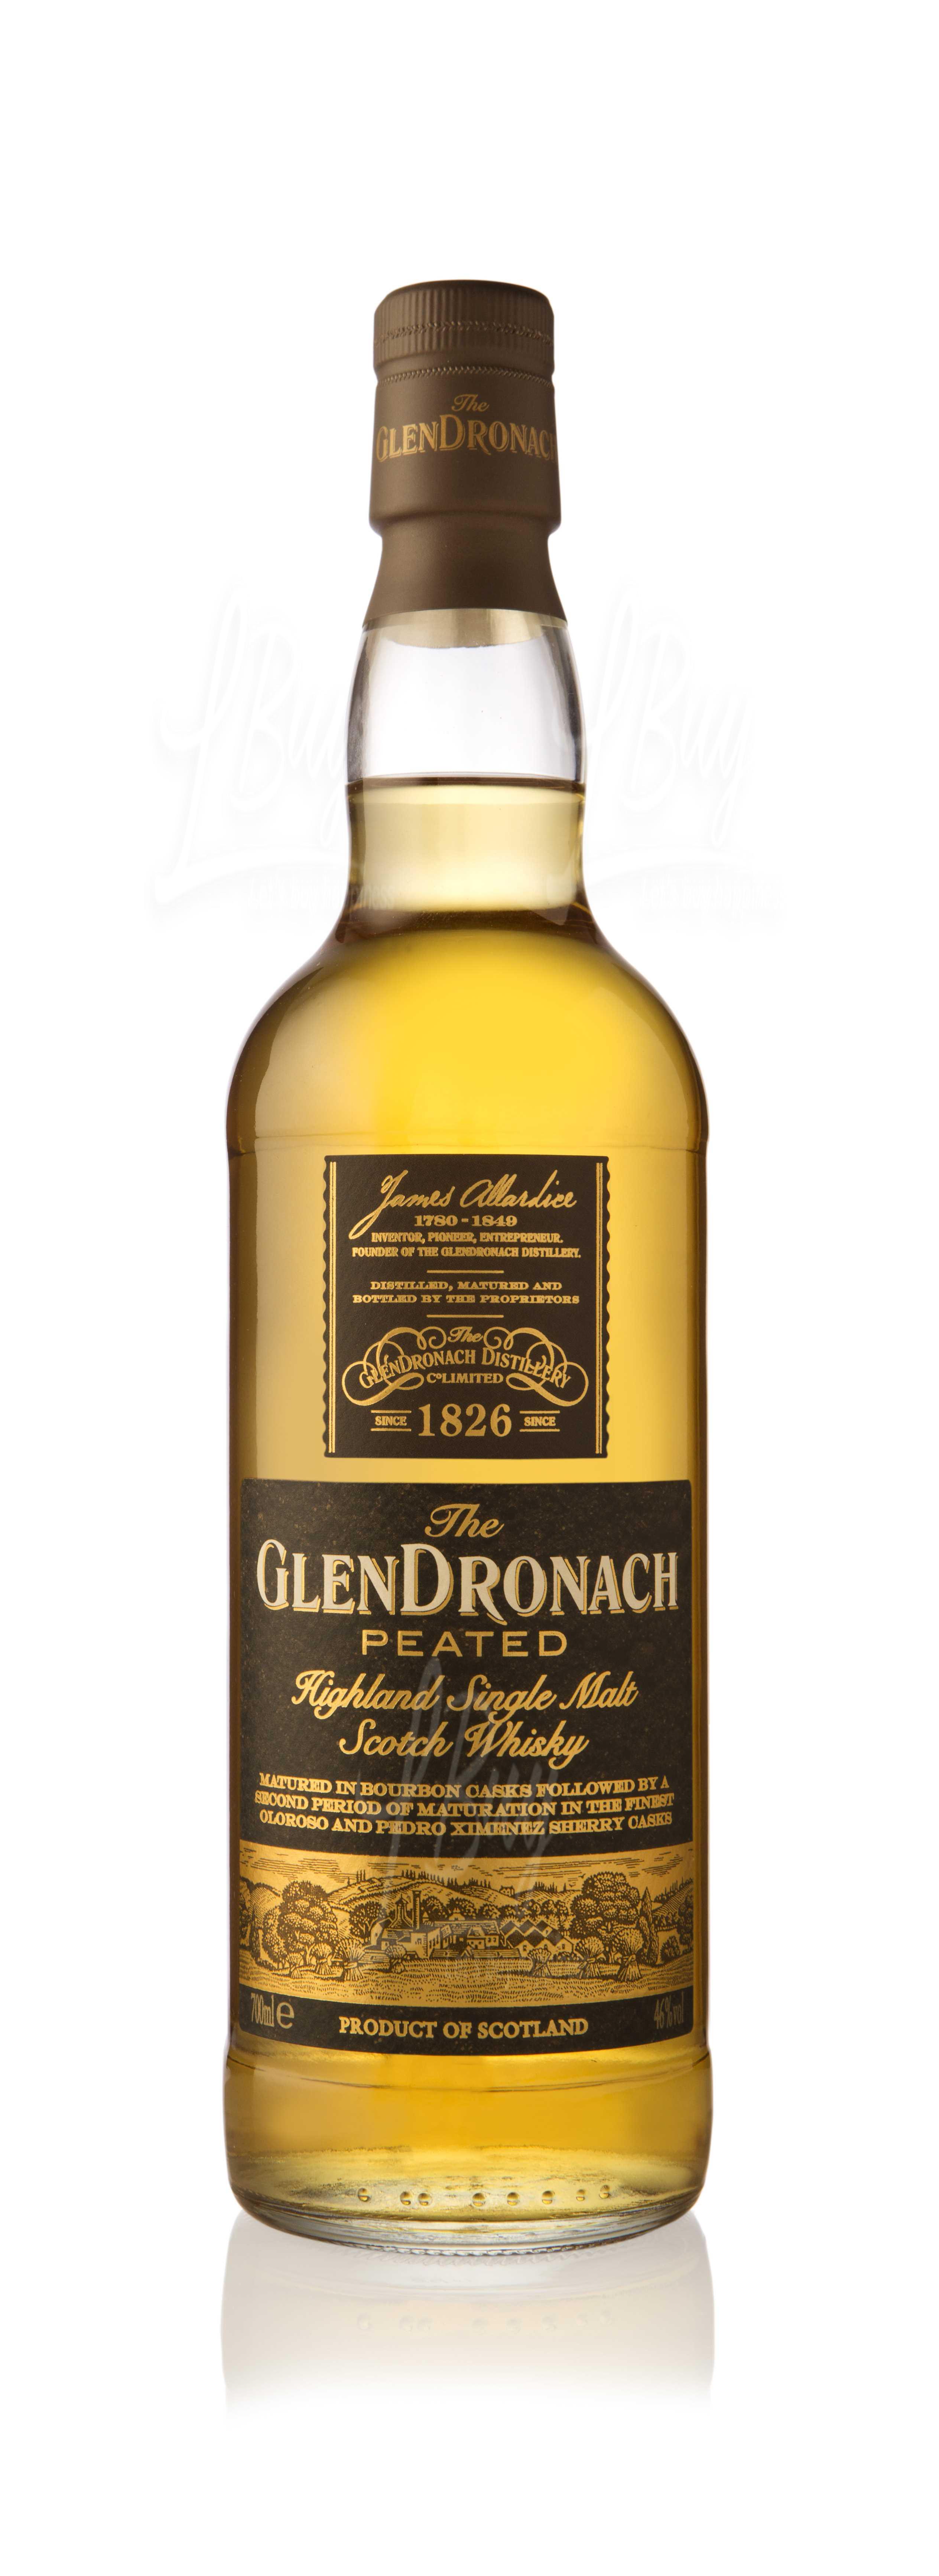 The GlenDronach Peated